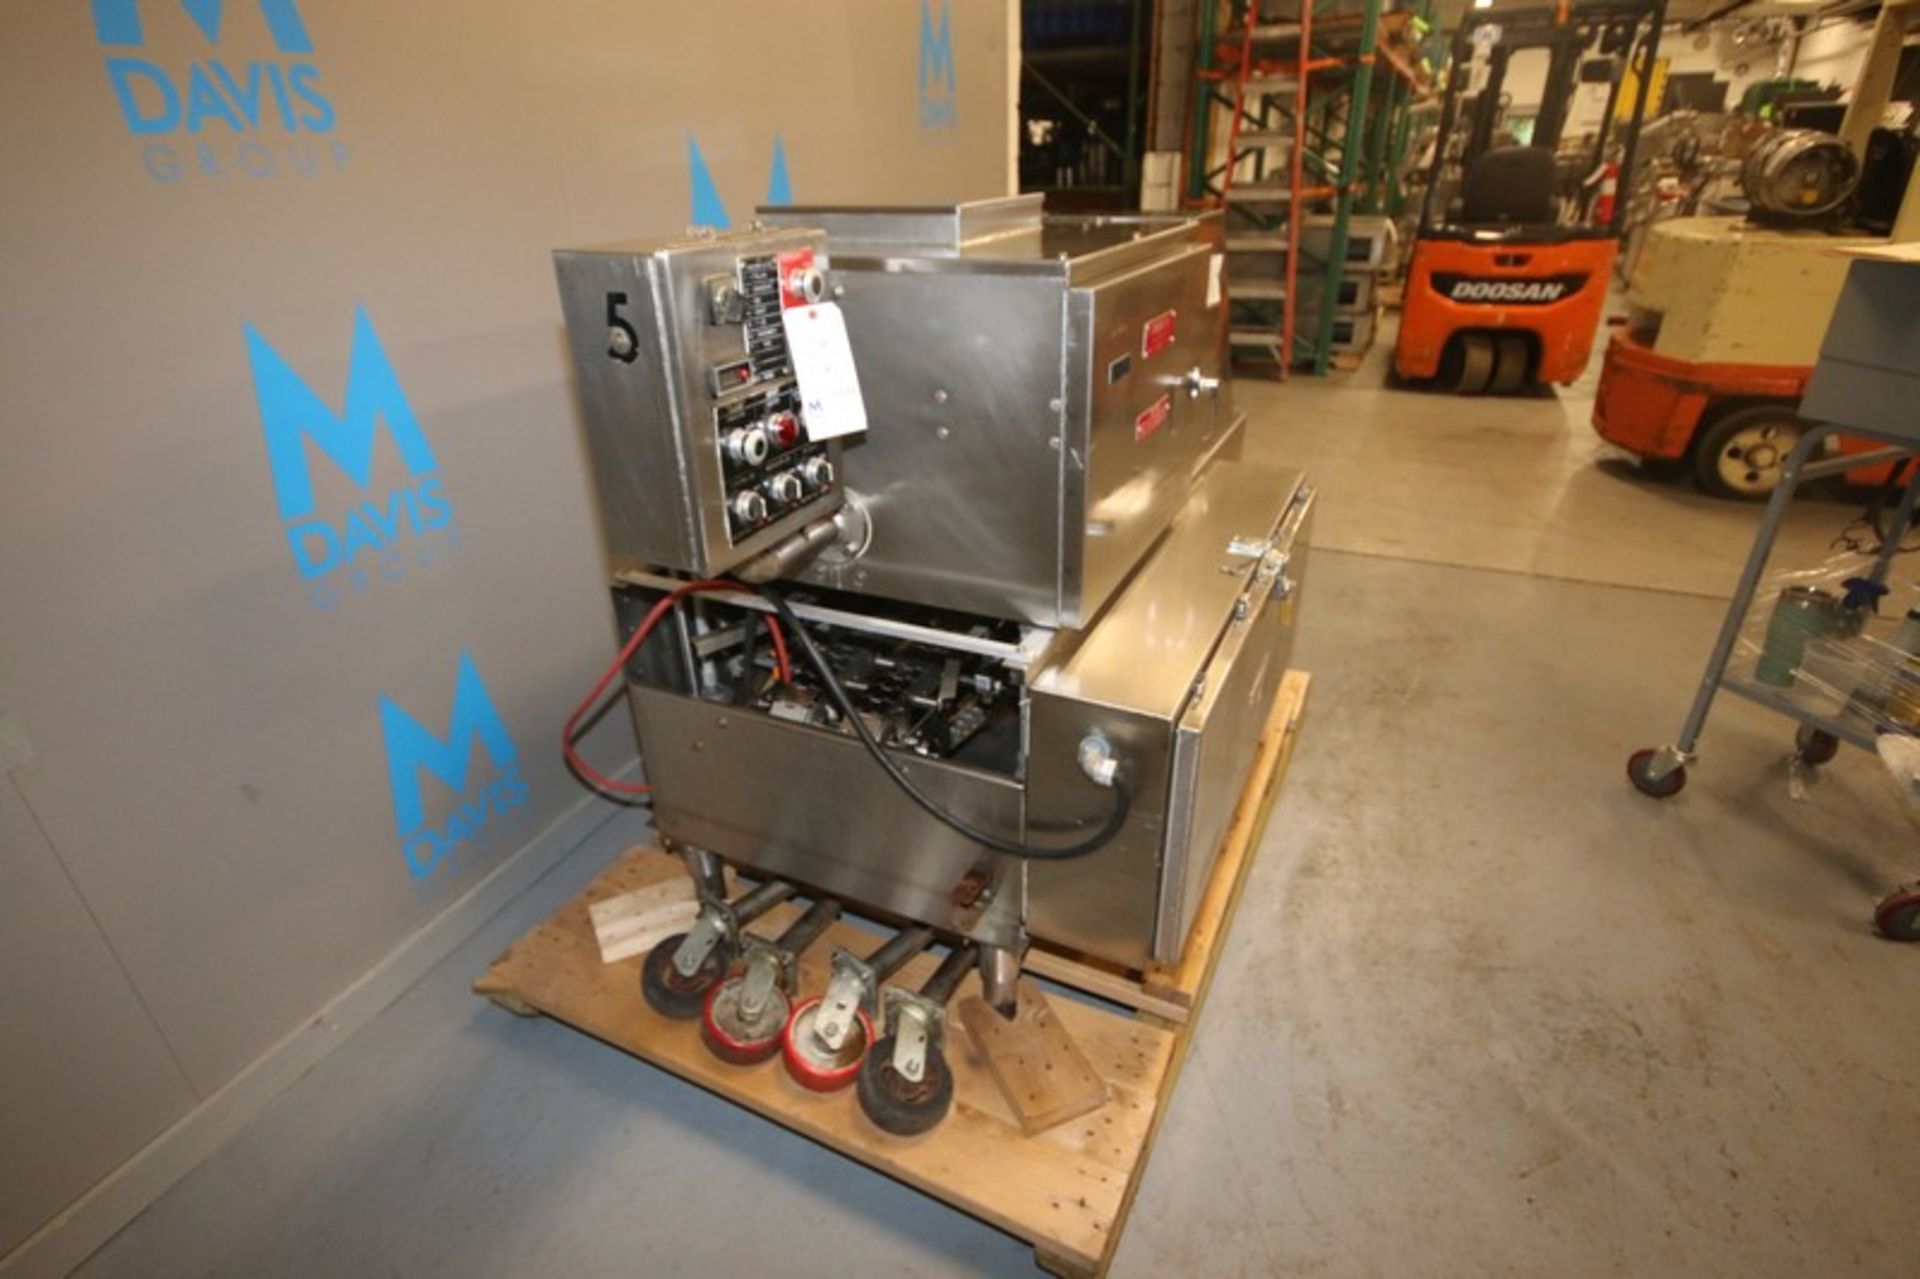 Mallet S/S Bread Pan Oiler,M/N 2001A, S/N 243-456, 460 Volts, 3 Phase, with Casters (INV#77729)( - Image 2 of 11